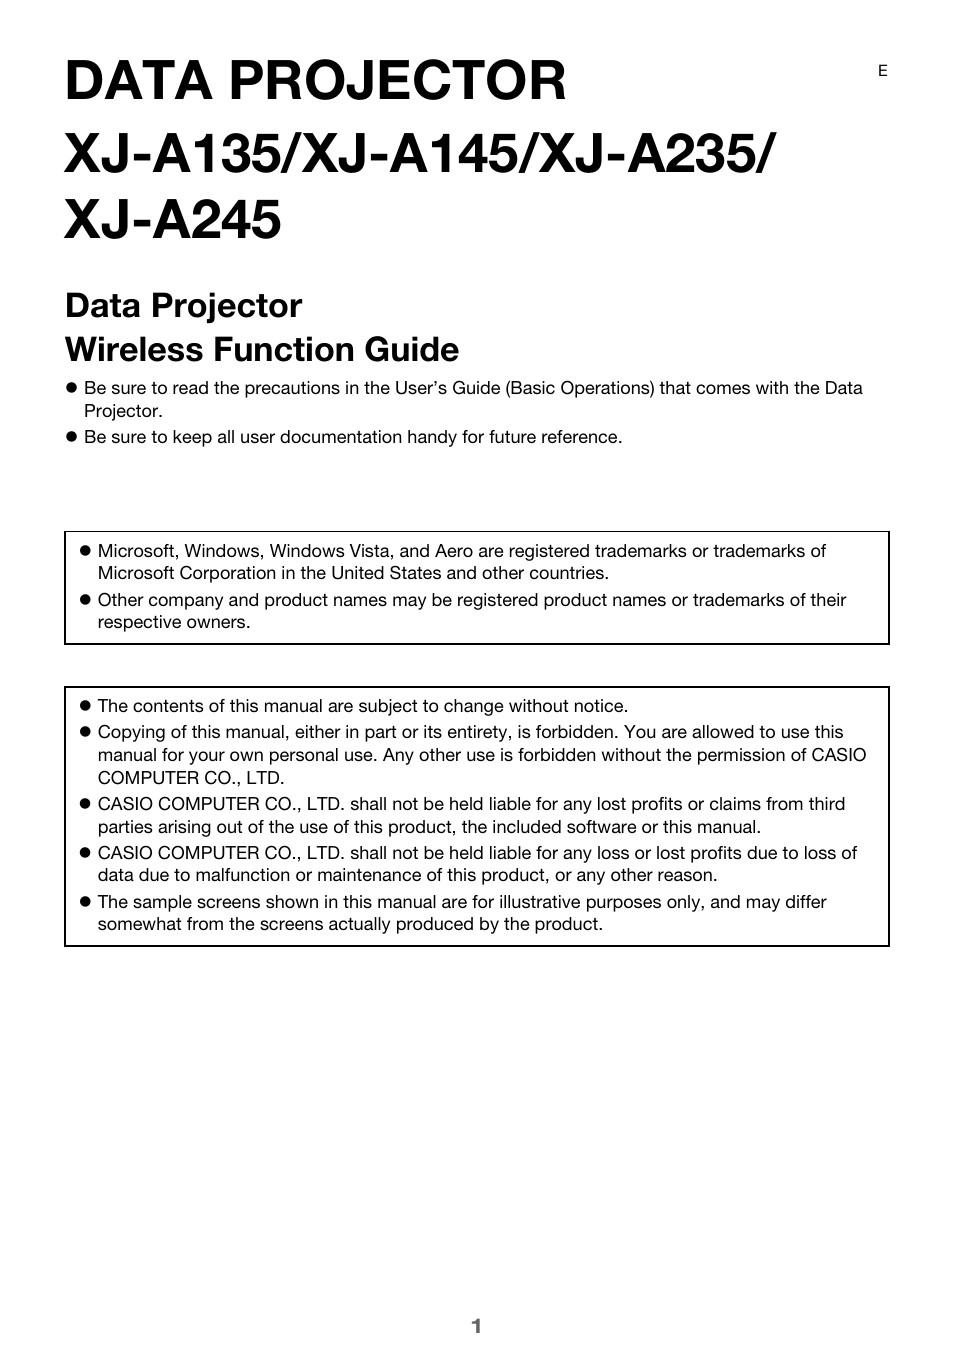 Casio XJ-A235 User Manual | 46 pages | Also for: MA1003-B, XJ-M145 (B9***A)  Wireless Function Guide, XJ-M155 (B9***A) Wireless Function Guide, XJ-M245  (B9***A) Wireless Function Guide, XJ-M255 (B9***A) Wireless Function Guide,  XJ-ST155,